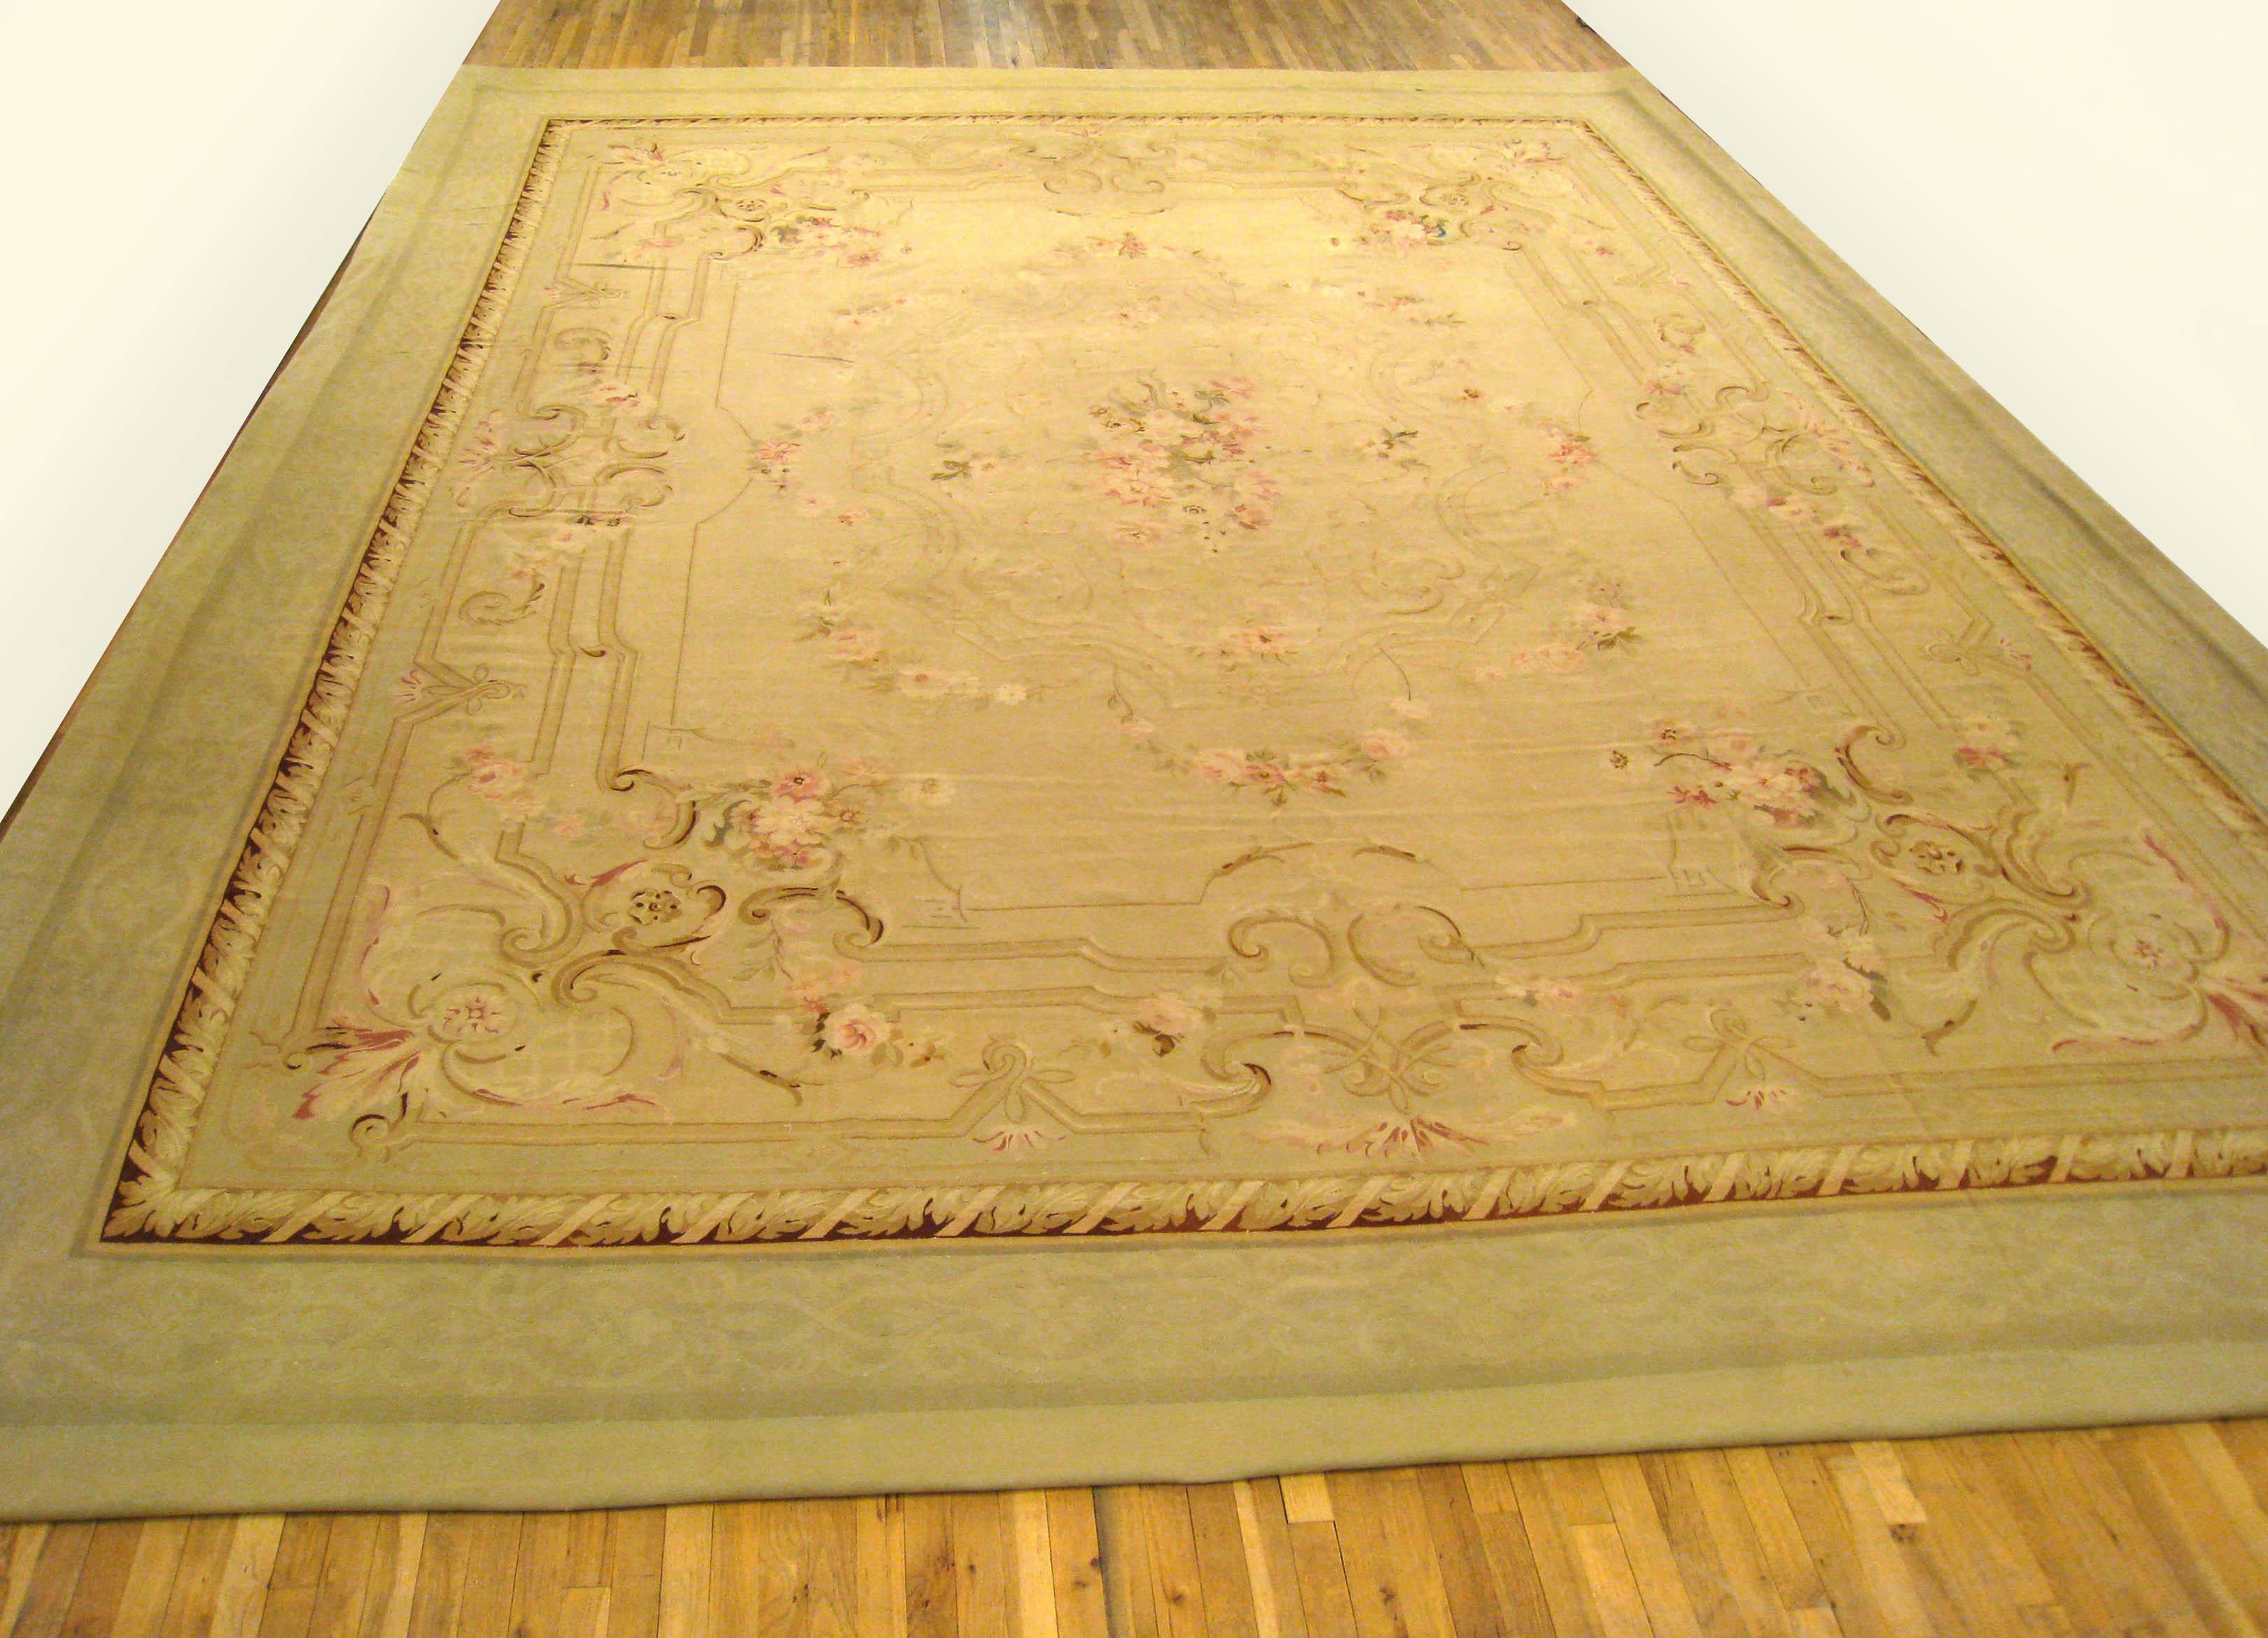 An antique French Aubusson 'Louis Philippe' carpet, circa 1880, size 19'2 x 15'0. This classic flat-woven carpet features an elegant central medallion in a softly hued primary field, and is enclosed within a sumptuous floral border. Composed of 100%